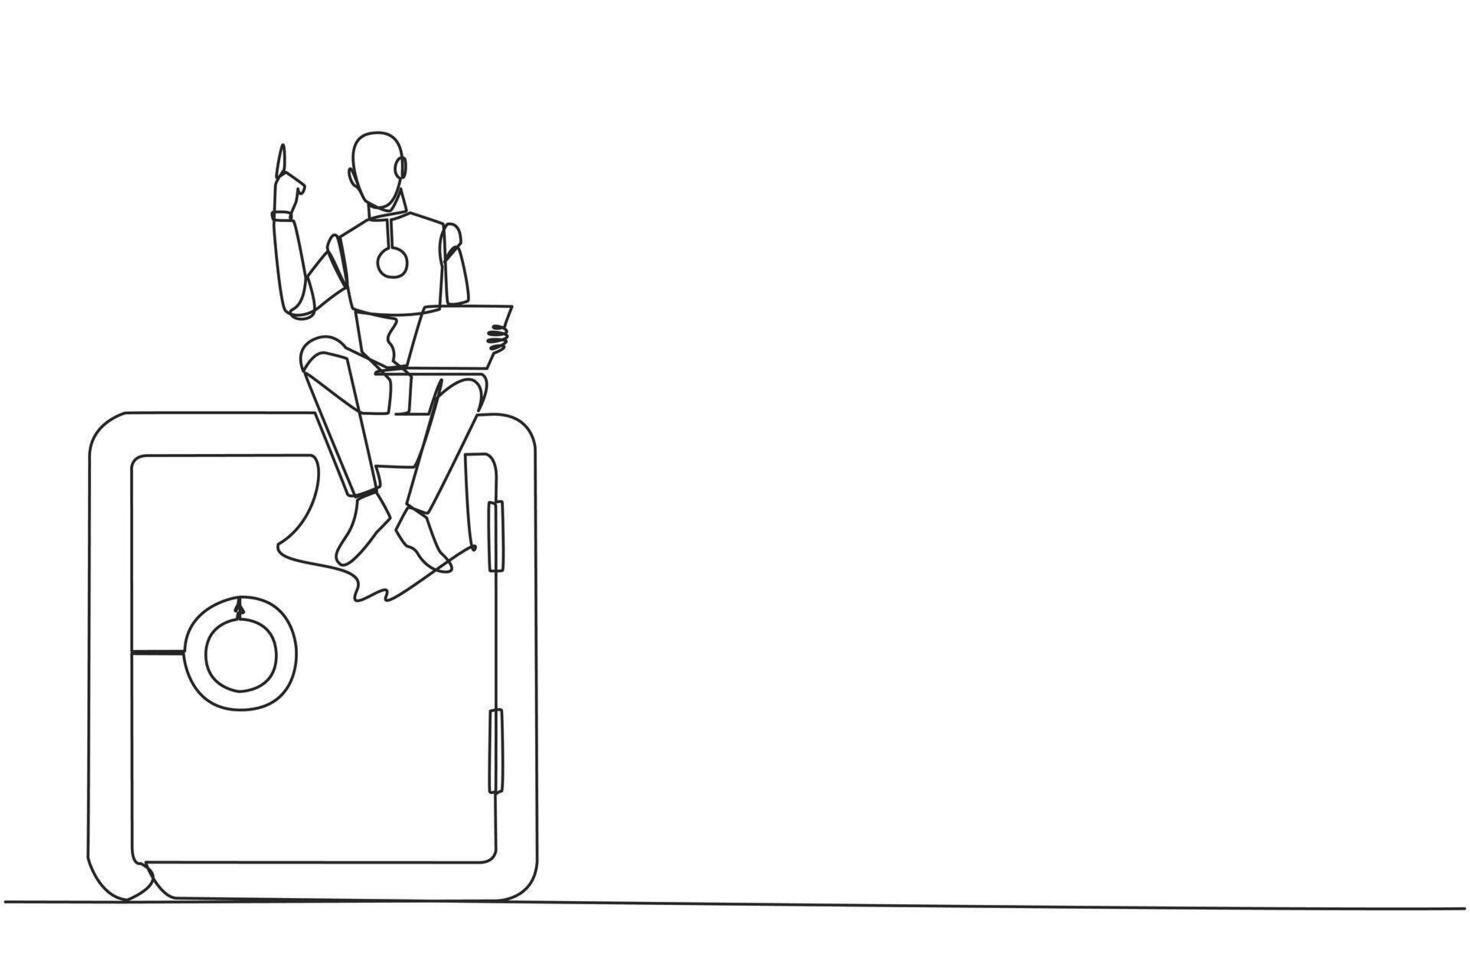 Single one line drawing robotic artificial intelligence sitting on giant safe deposit box holding laptop raise one hand. Robots also have a role to guard valuable items. Continuous line design graphic vector